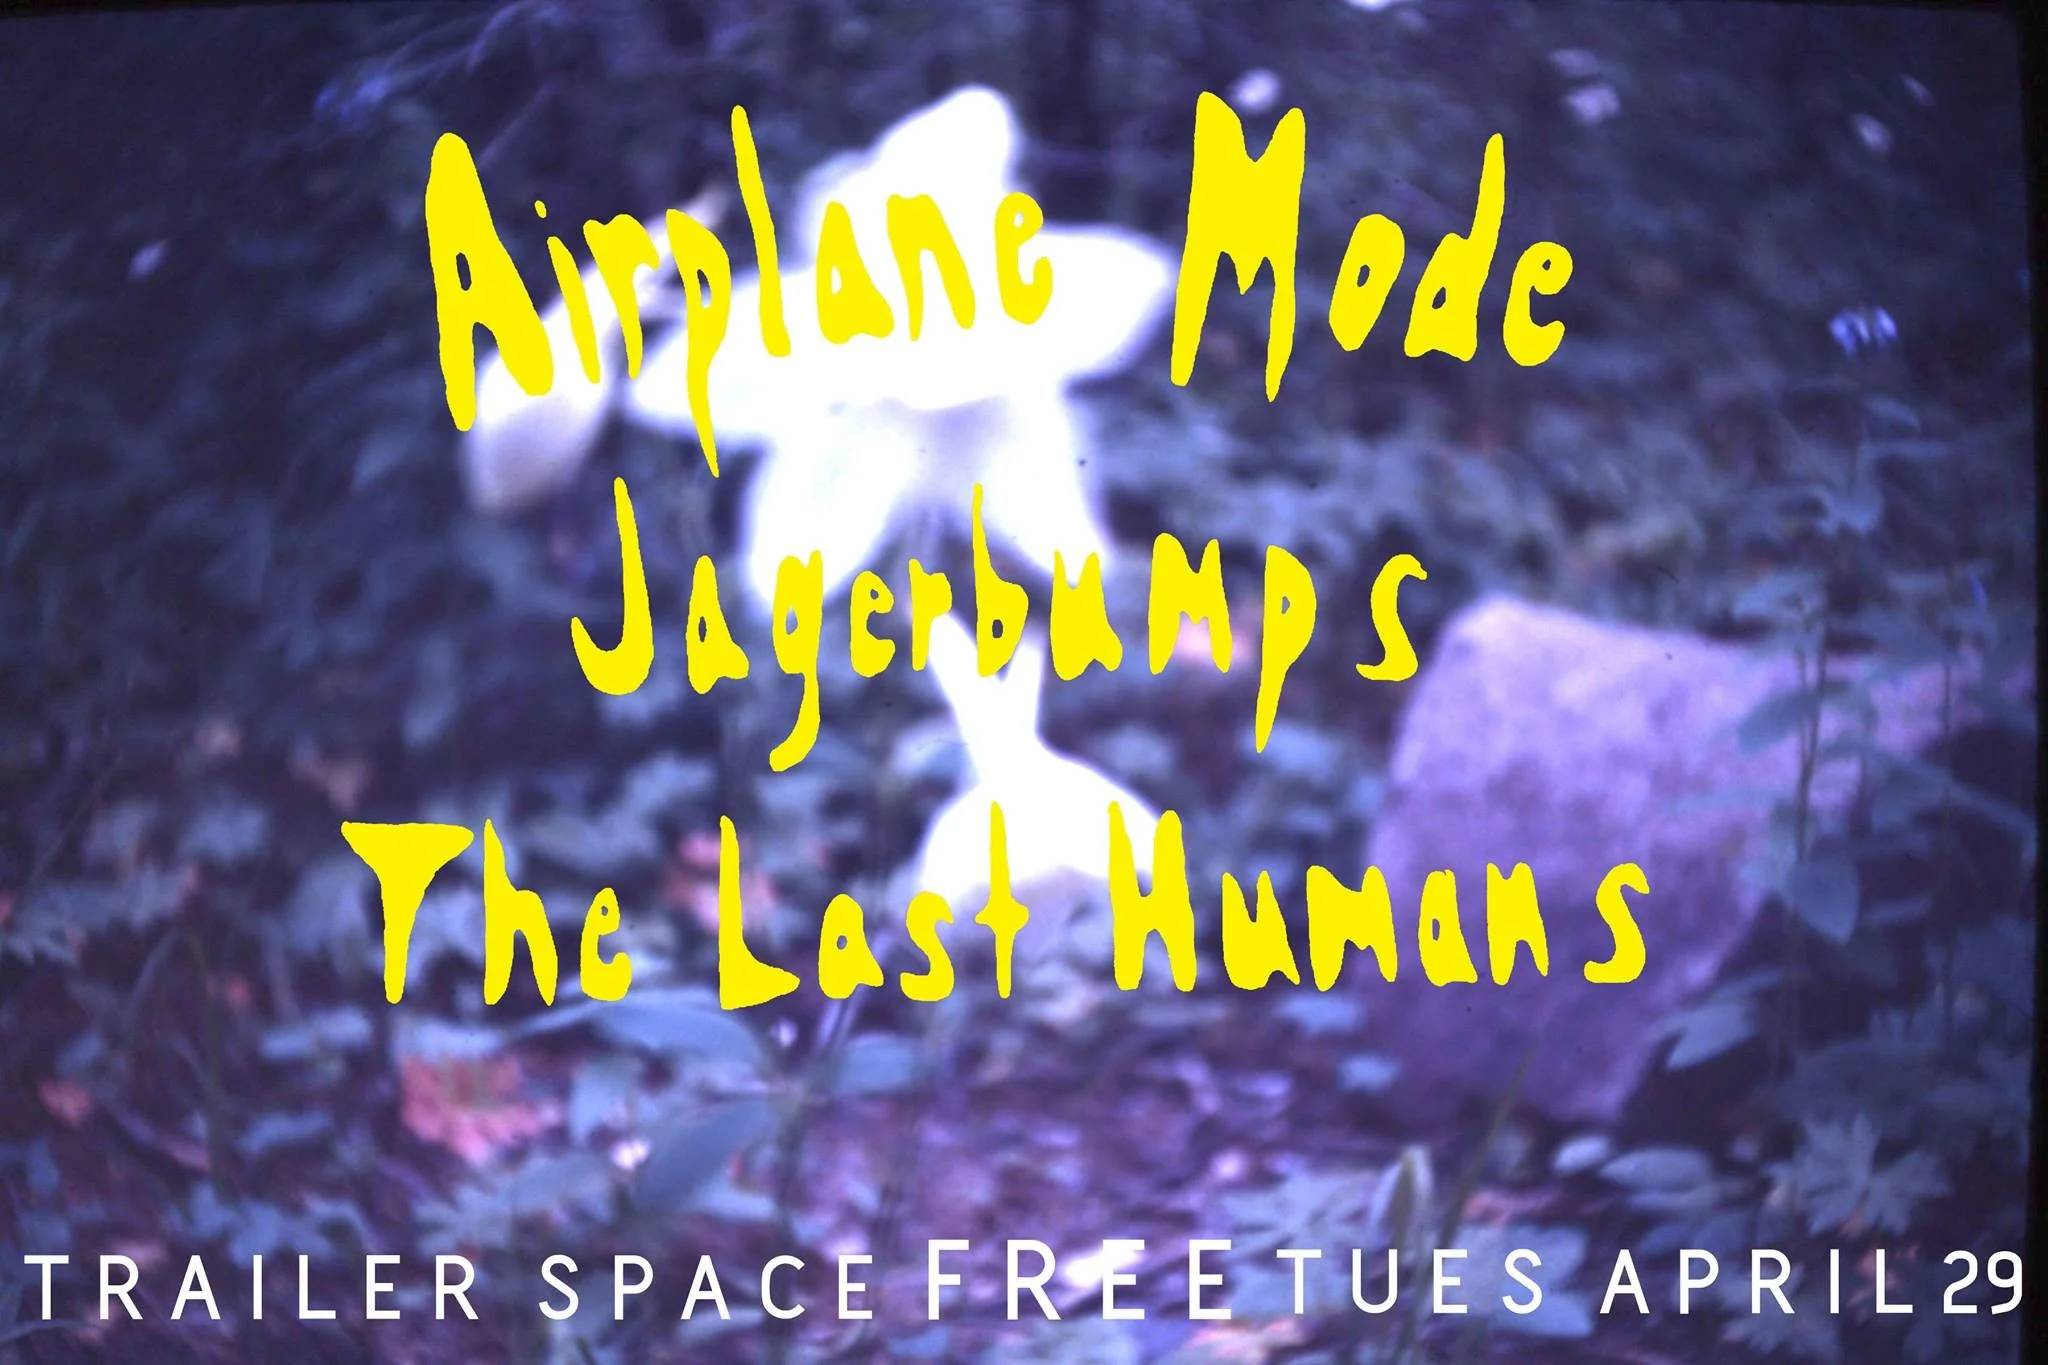 Airplane Mode, Jagerbumps, The Last Humans at Trailer Space Records